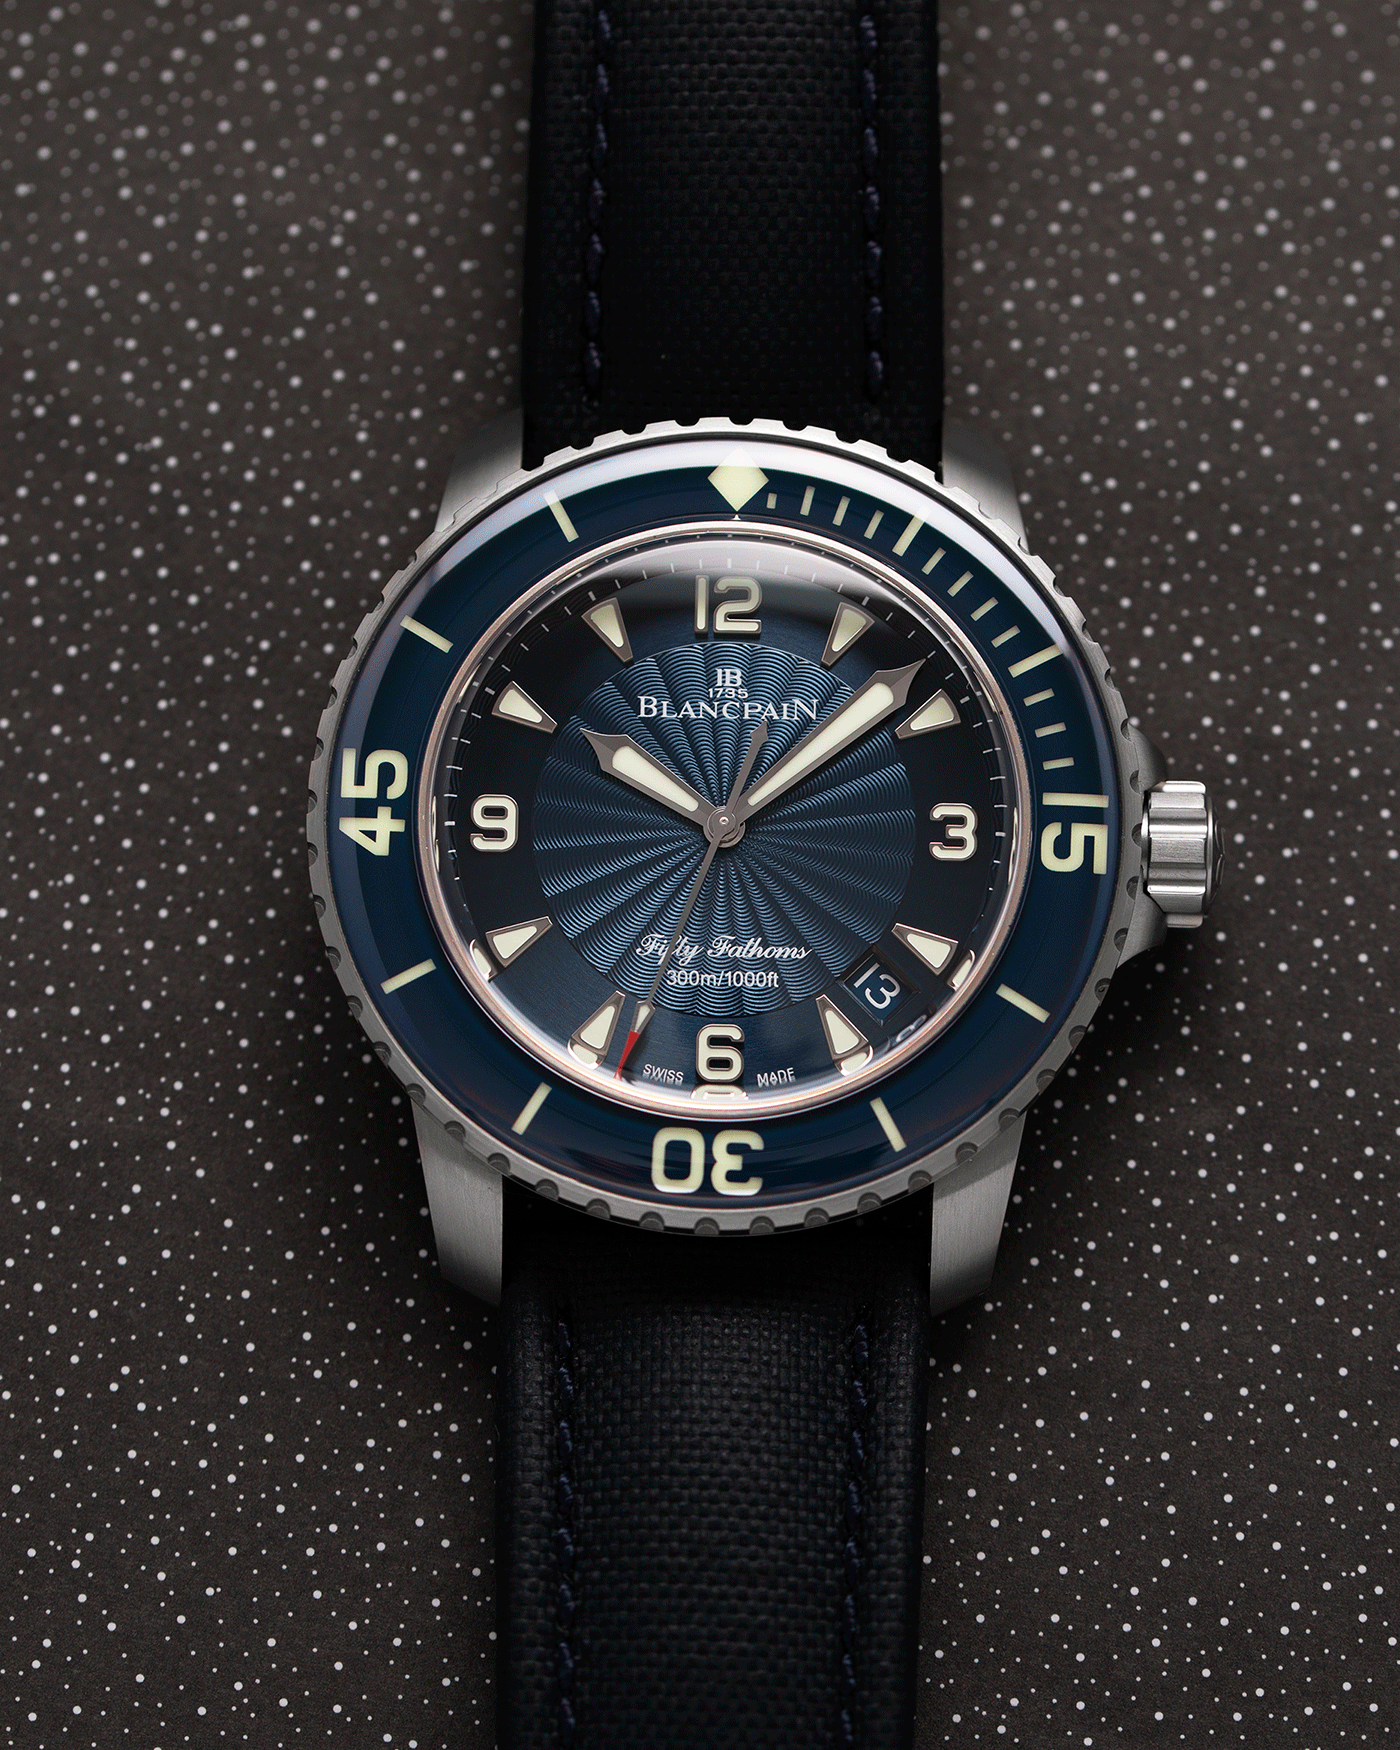 Brand: Blancpain Year: 2015 Model: Fifty Fathoms Reference Number: 5015D-1140-52B  Material: Stainless Steel Movement: Cal. 1315 Case Diameter: 45mm Bracelet/Strap: Blancpain Blue Rubberised Sailcloth Strap